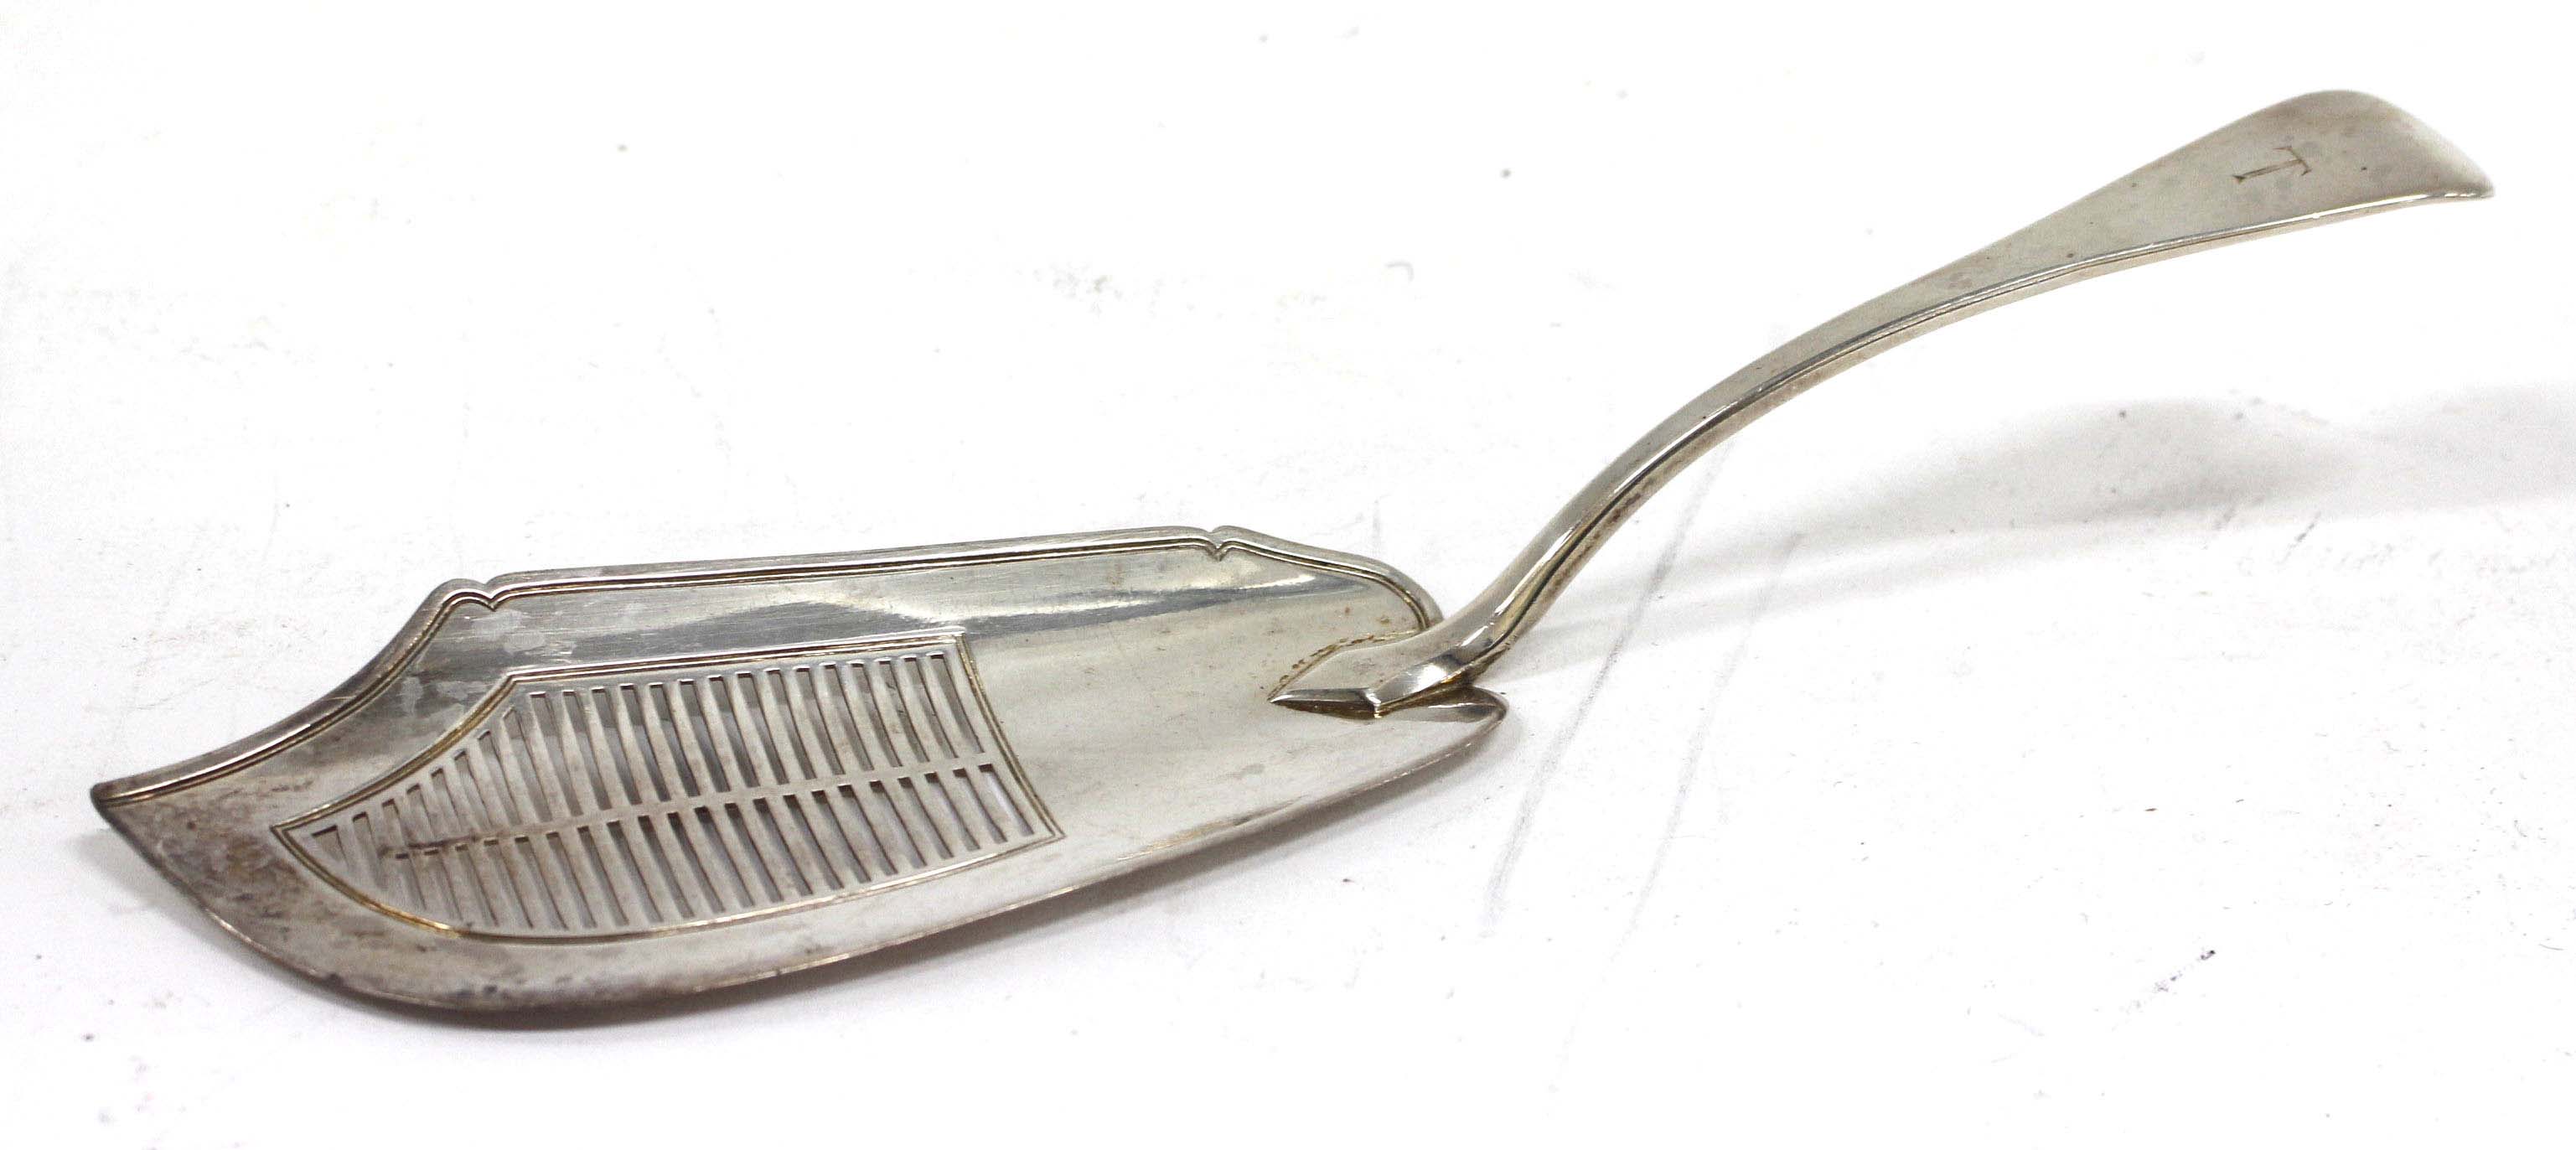 A GEORGE III OLD ENGLISH PATTERN FISH SLICE with pieced blade, marks for London and makers mark W.K.